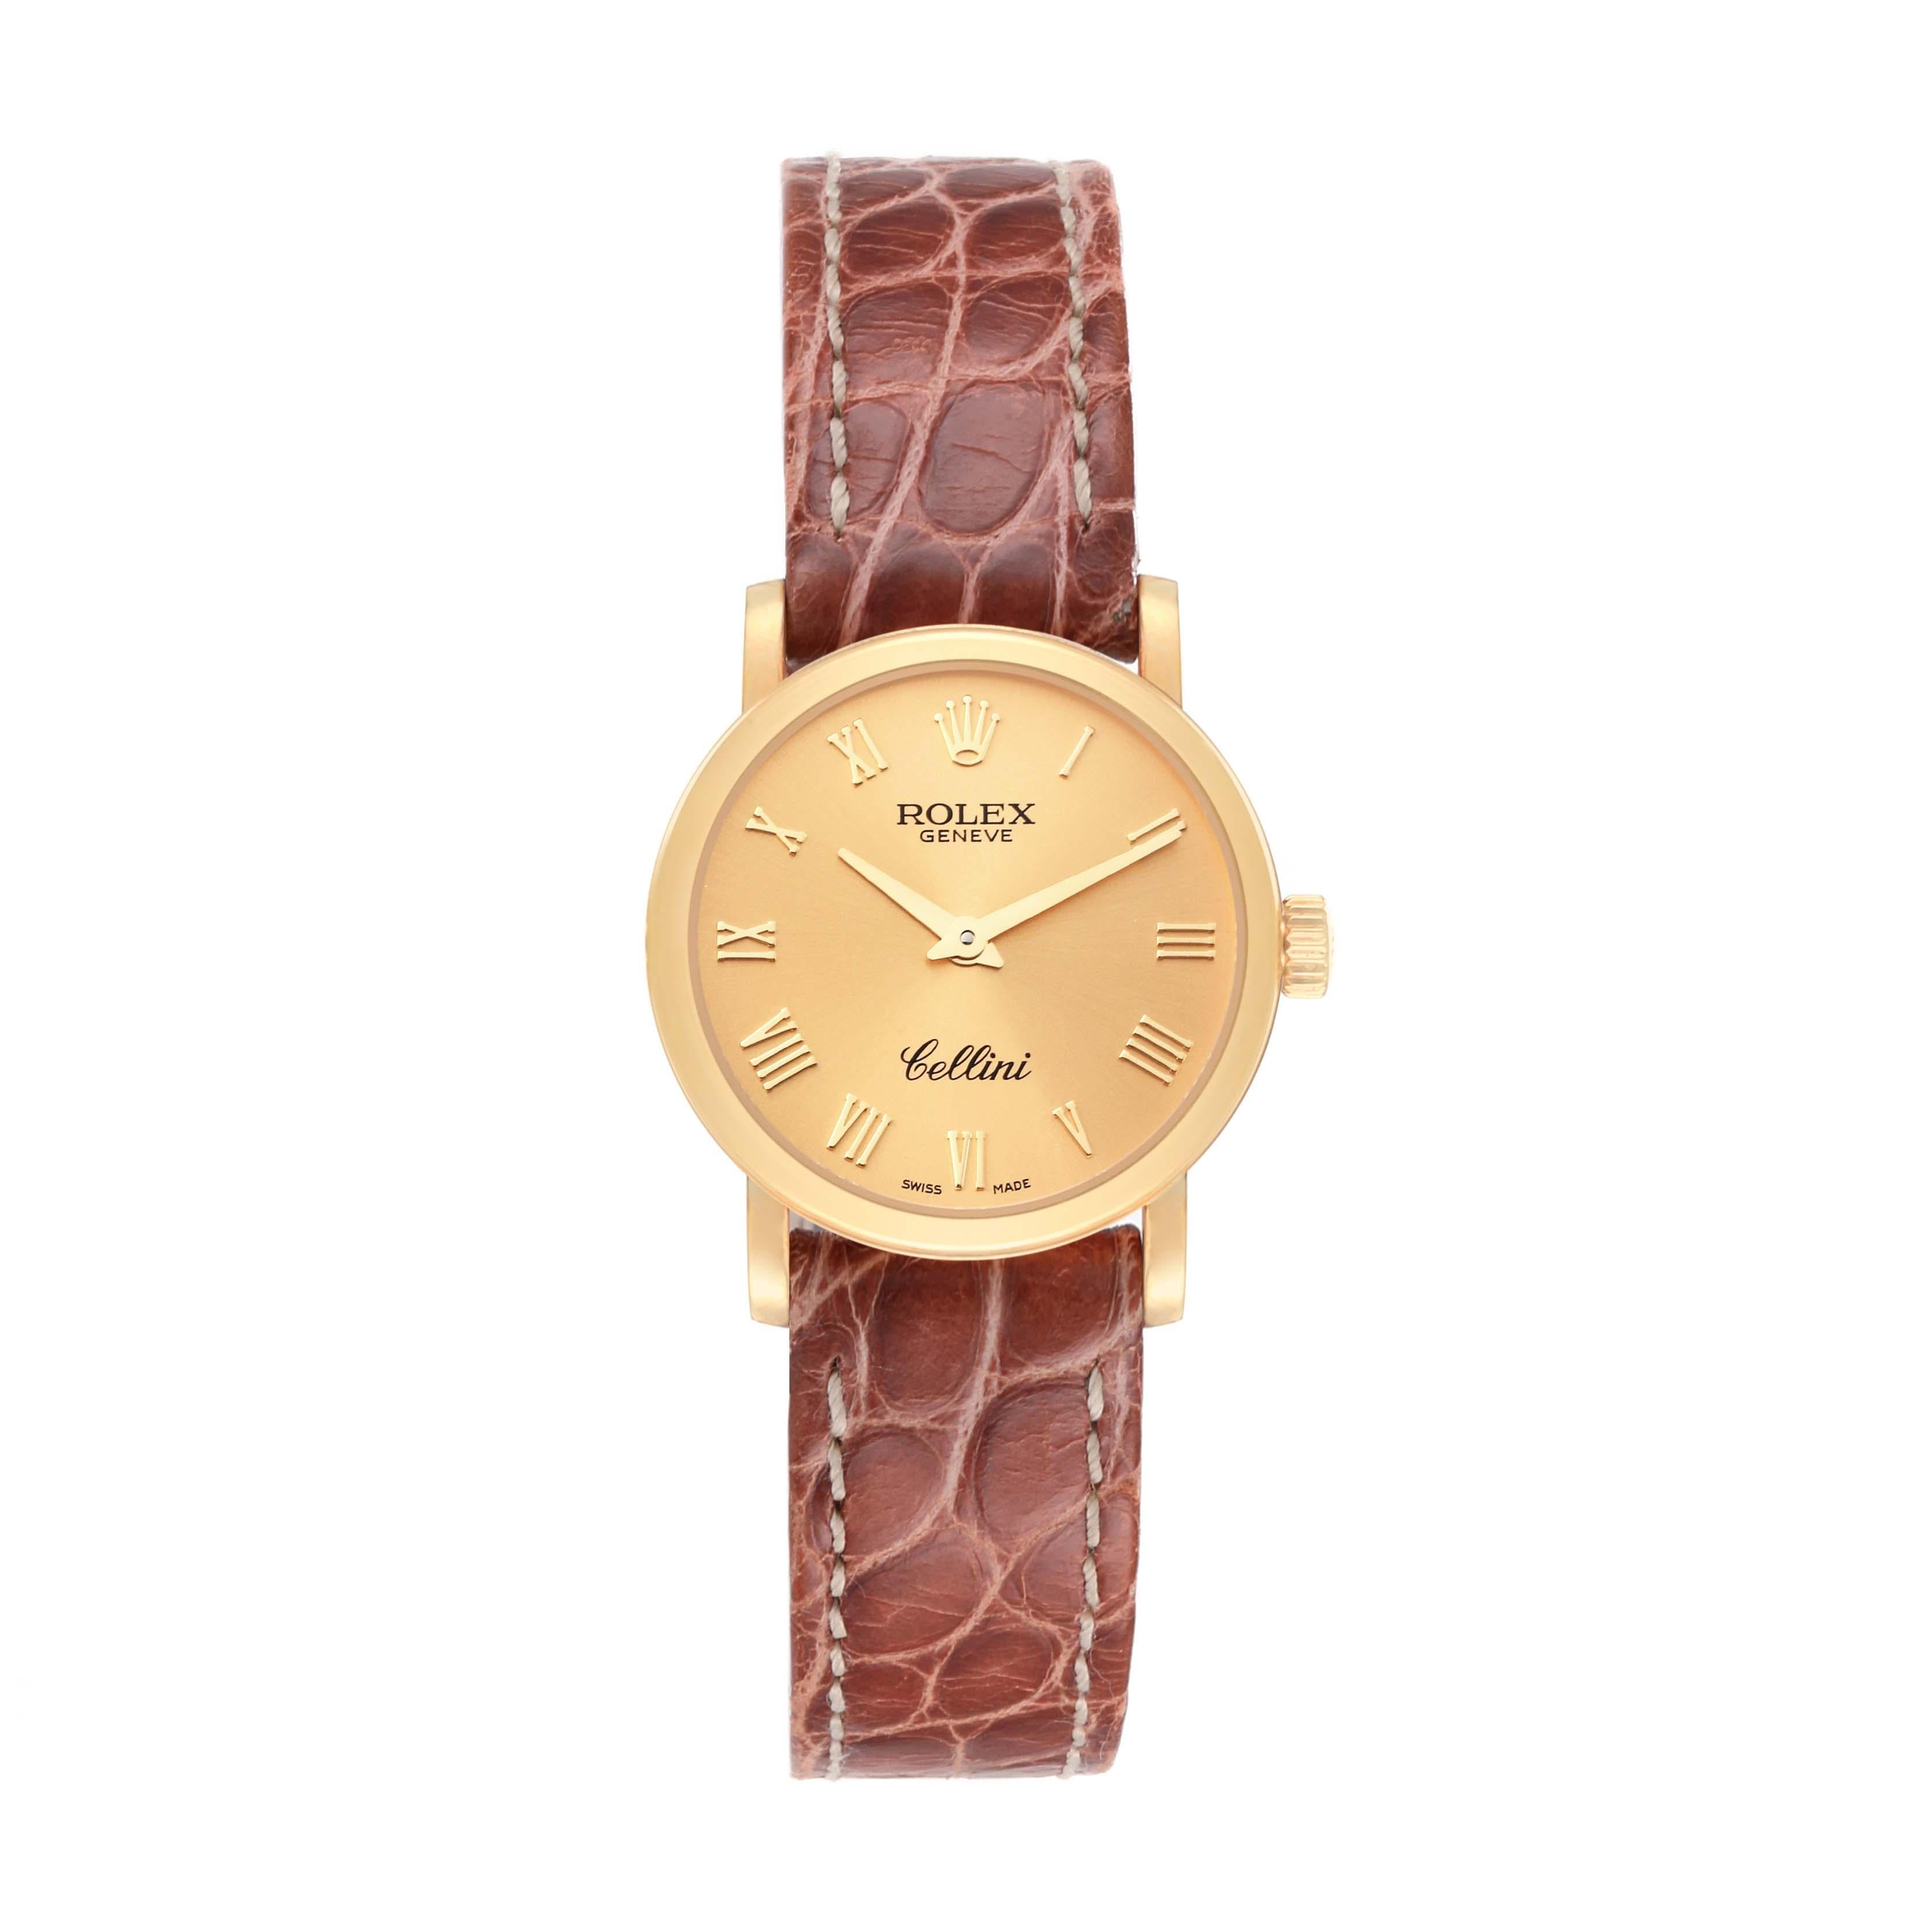 Rolex Cellini Classic Yellow Gold Brown Strap Ladies Watch 6110 Unworn. Quartz movement. 18k yellow gold slim case 26.0 mm in diameter. . Scratch resistant sapphire crystal. Flat profile. Champagne dial with raised yellow gold Roman numerals. Brown